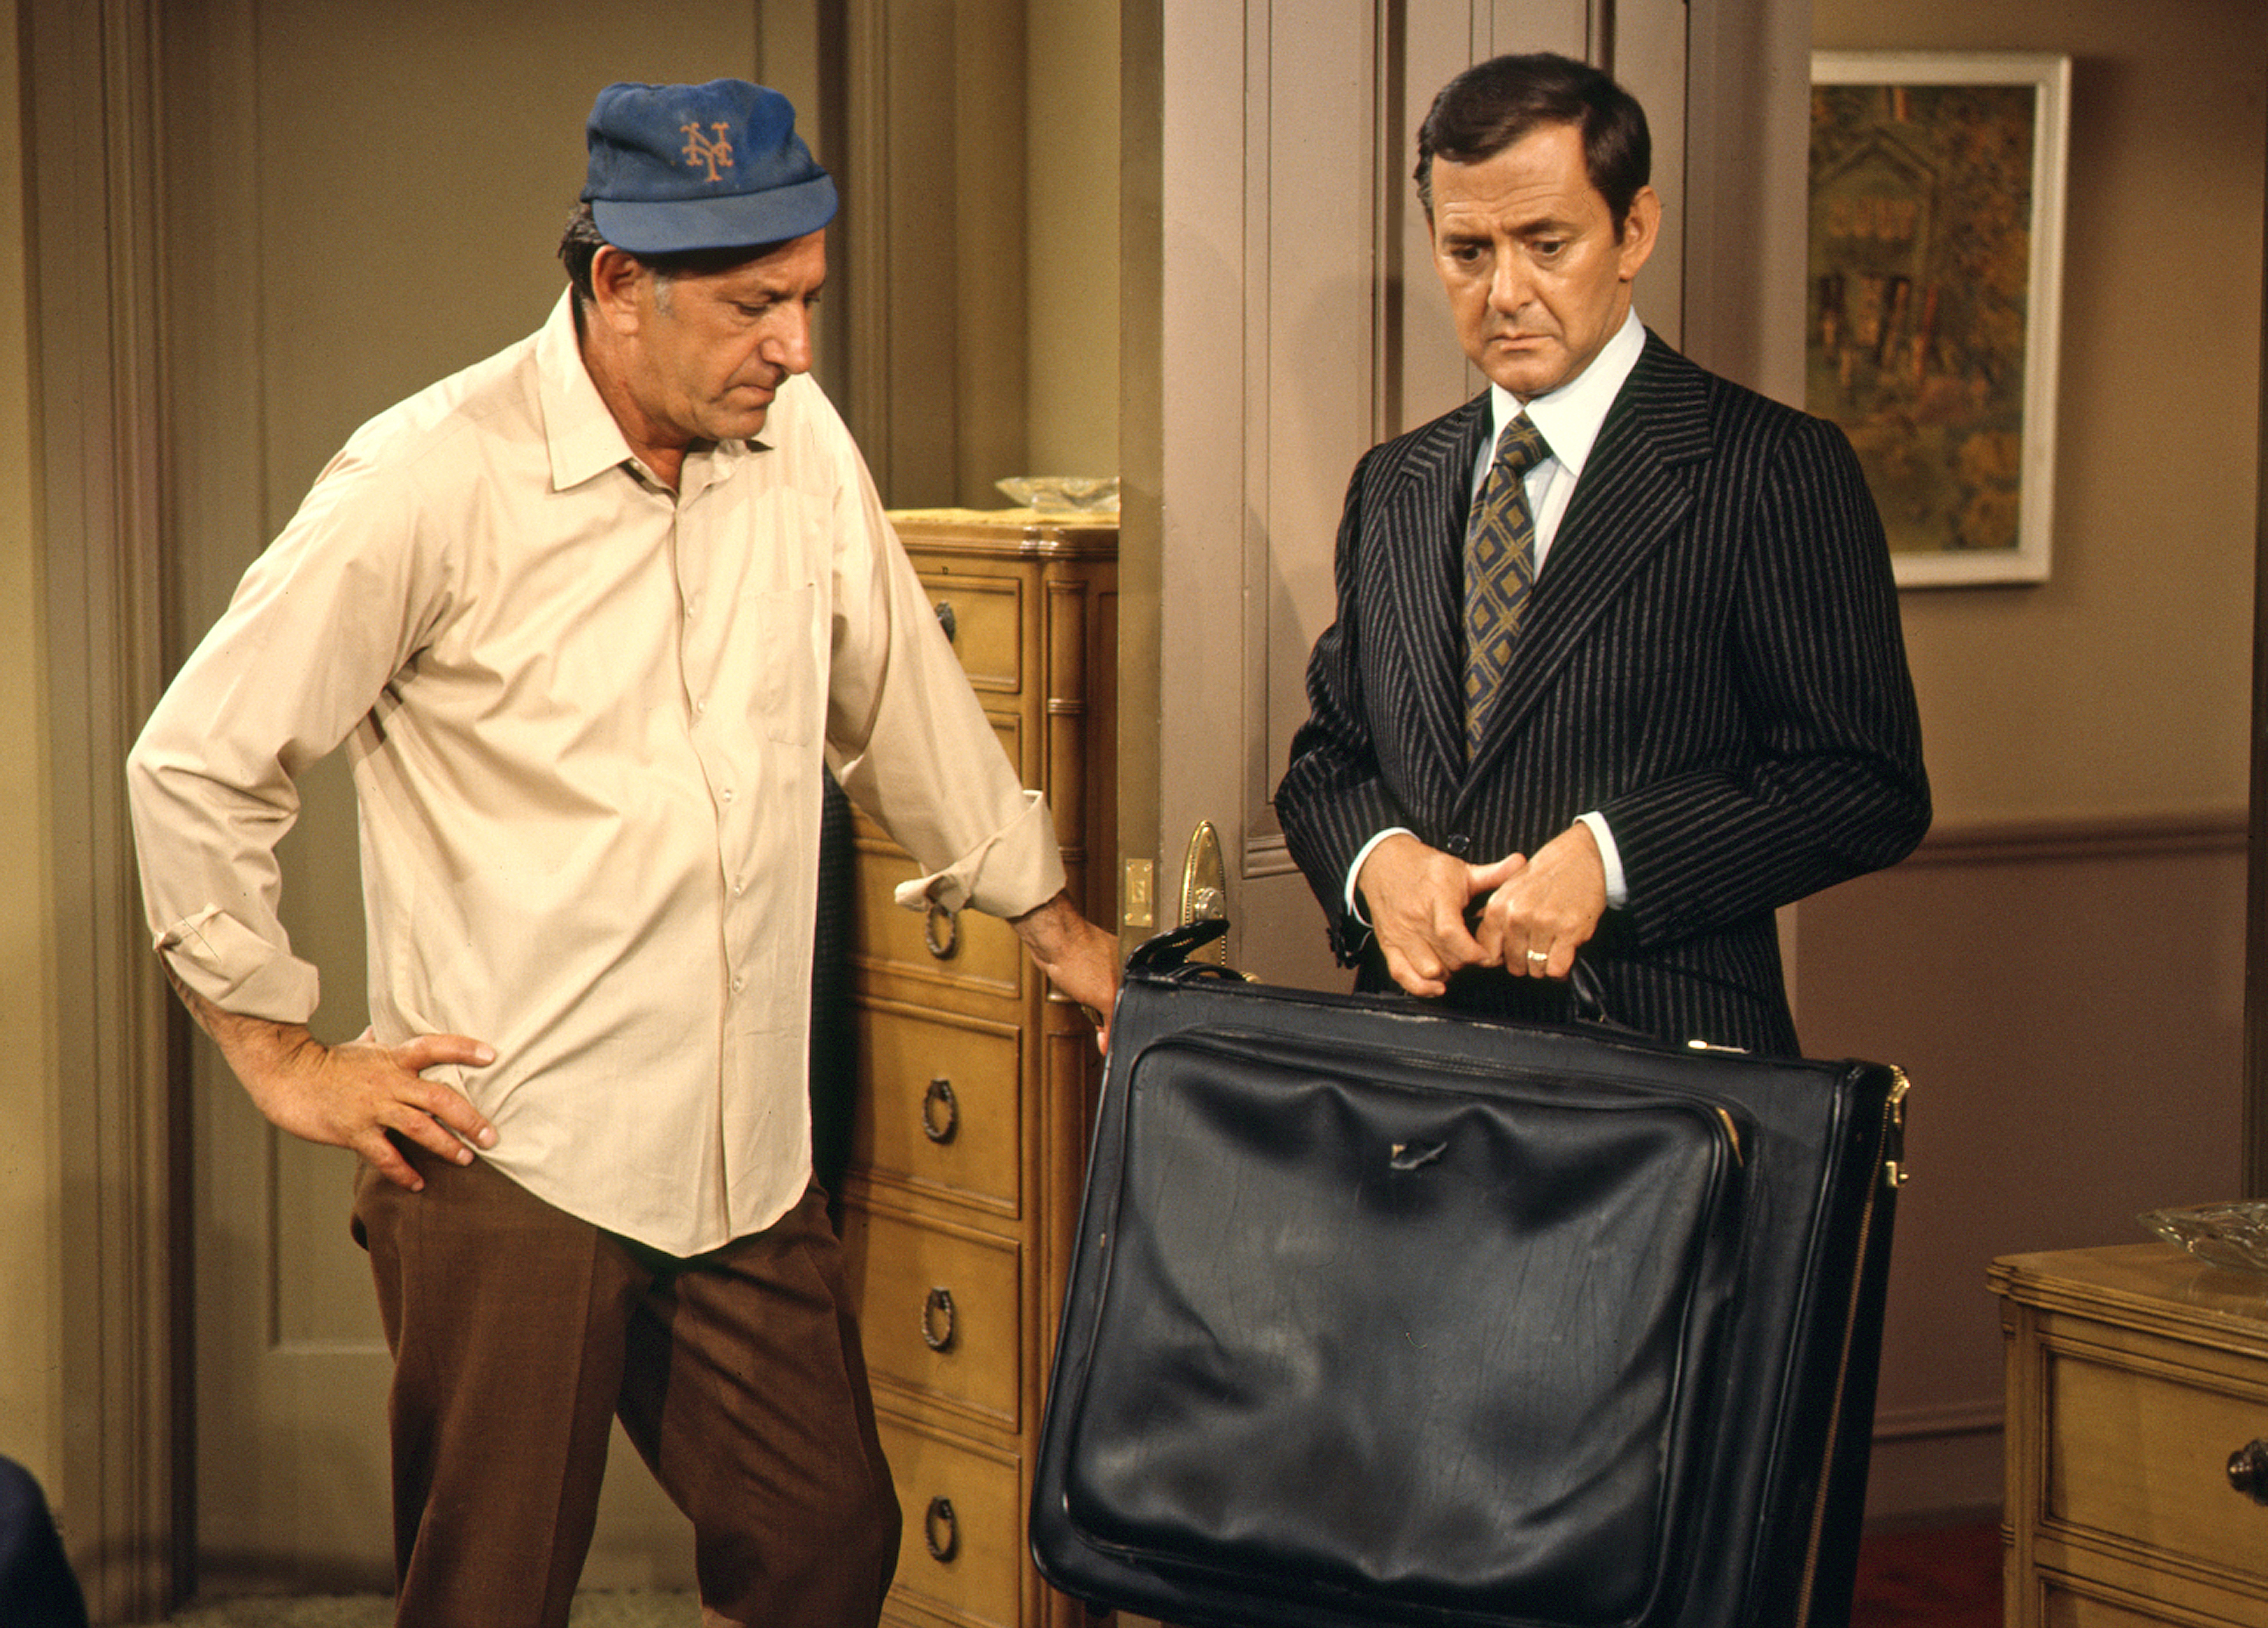 'The Odd Couple' Set Secrets About the Series Revealed